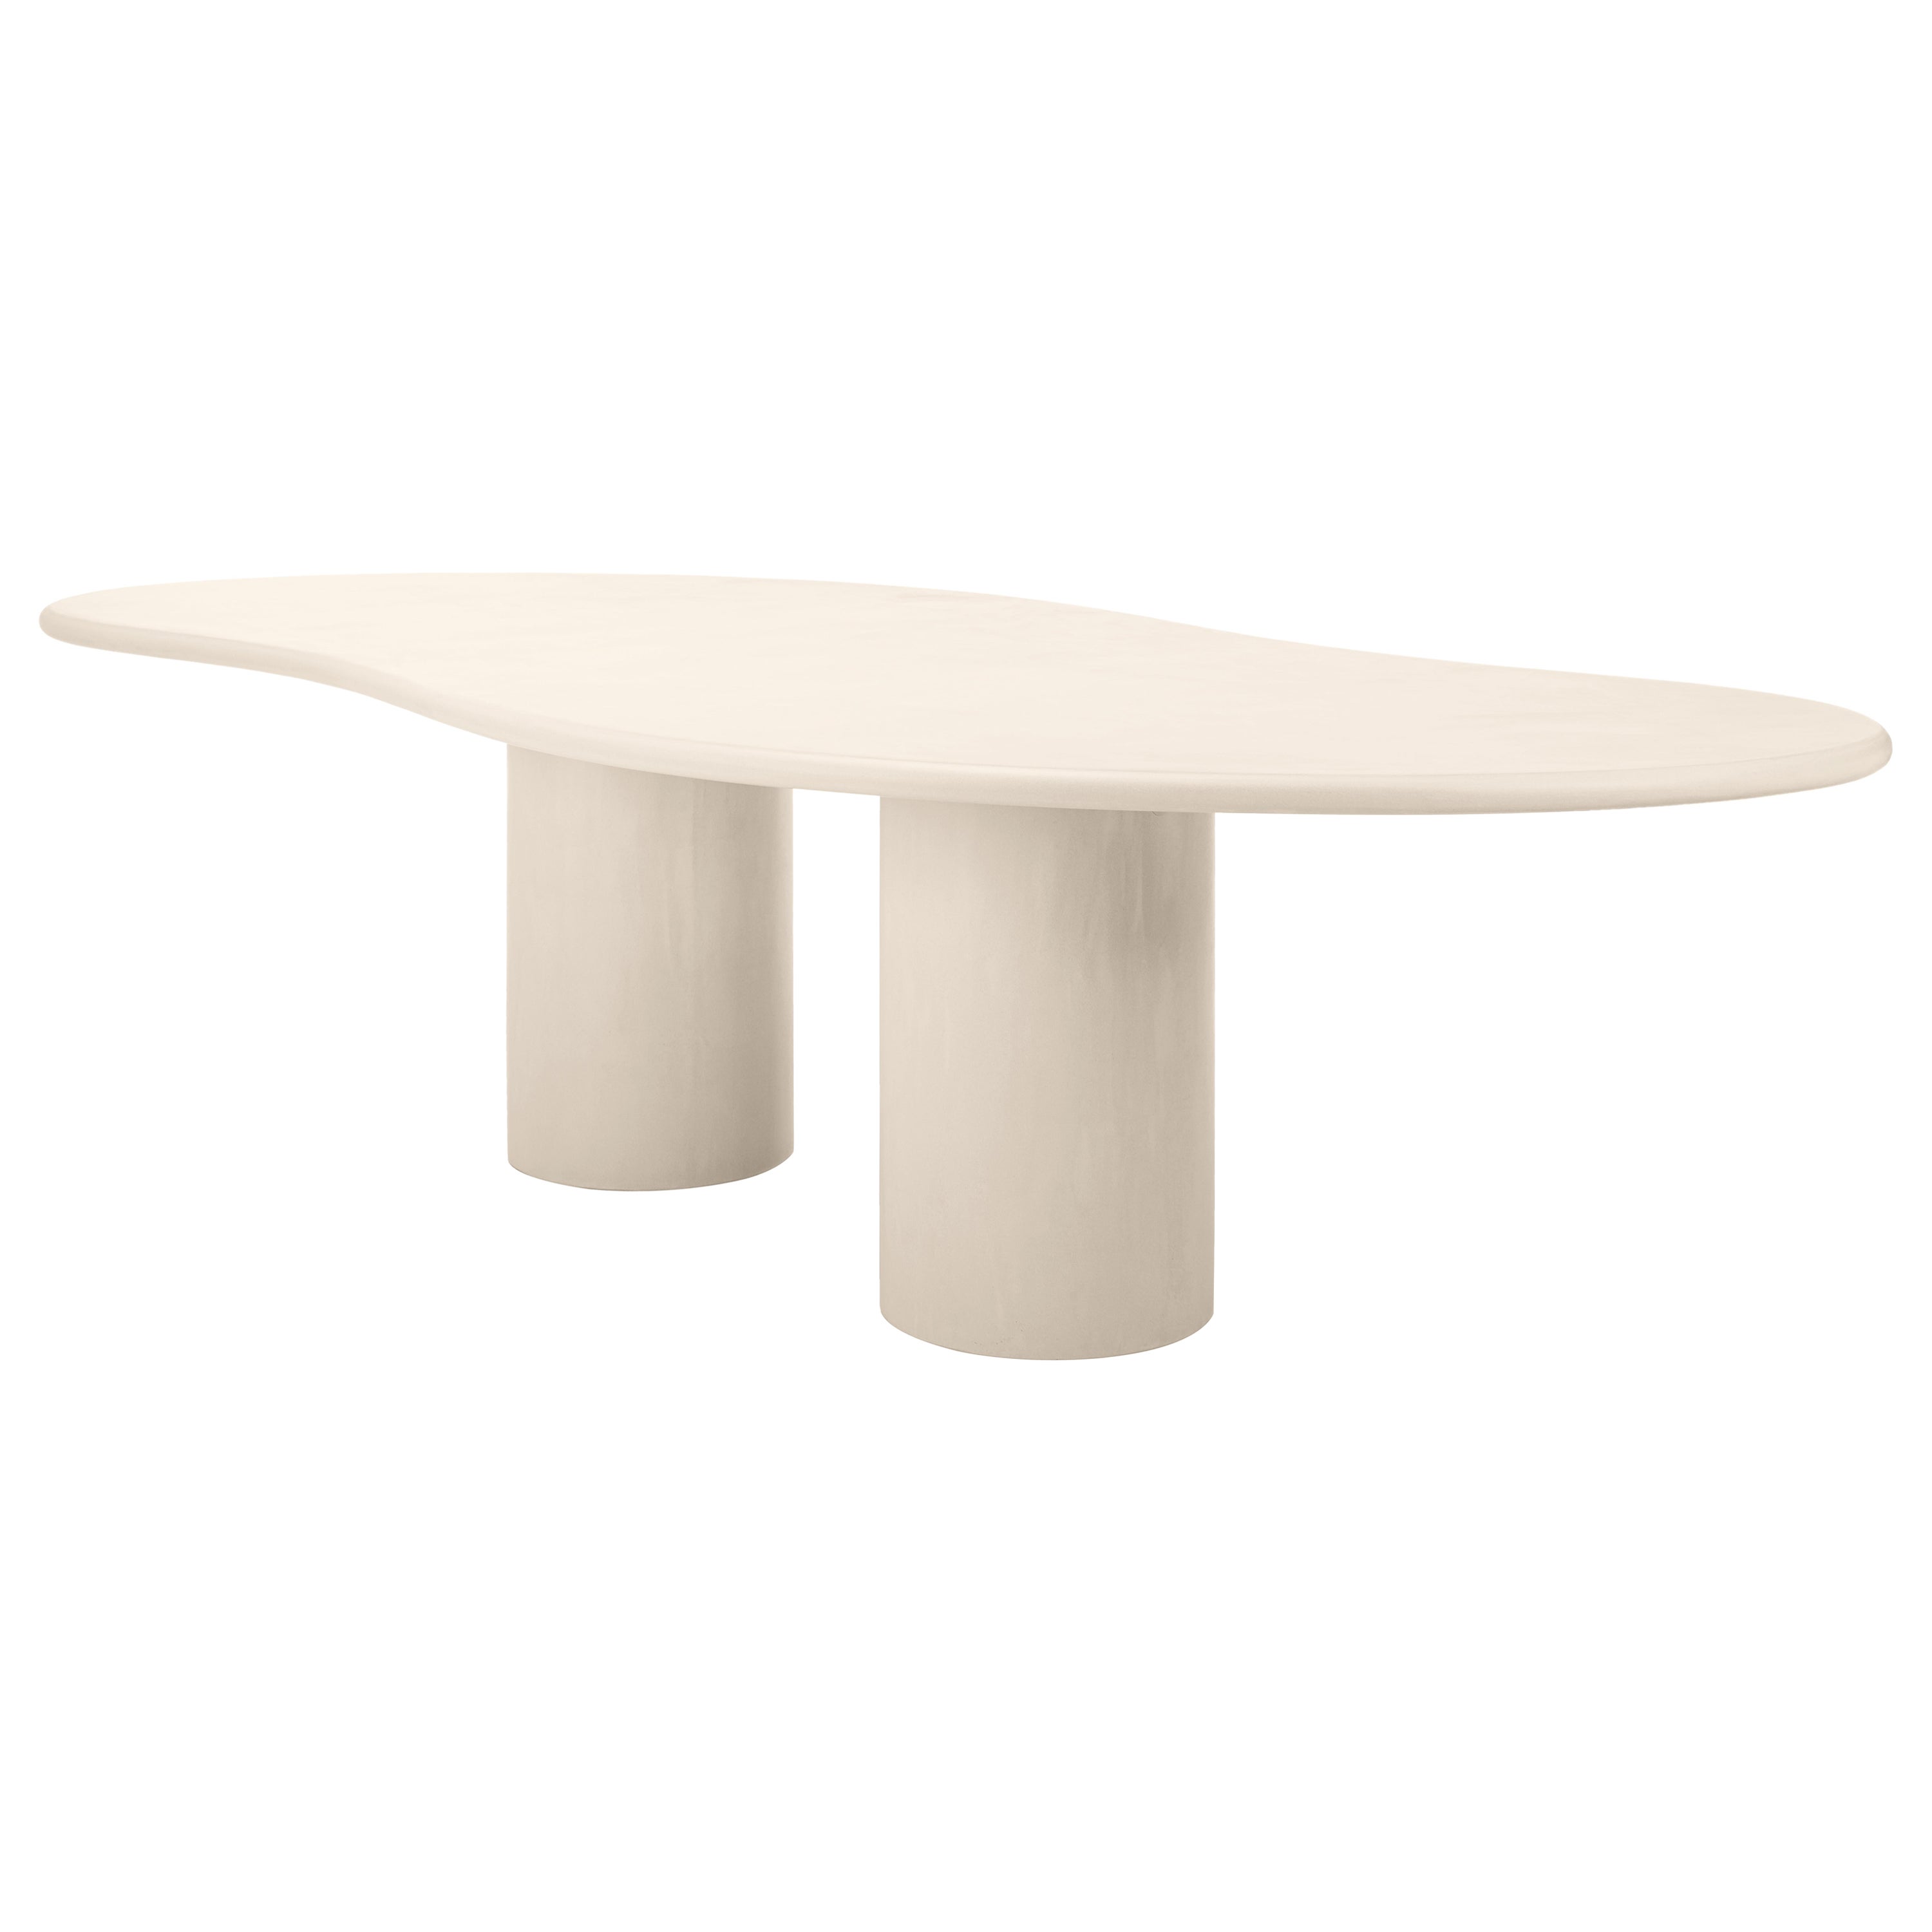 Natural Plaster Dining Table "Latus" 260 by Isabelle Beaumont